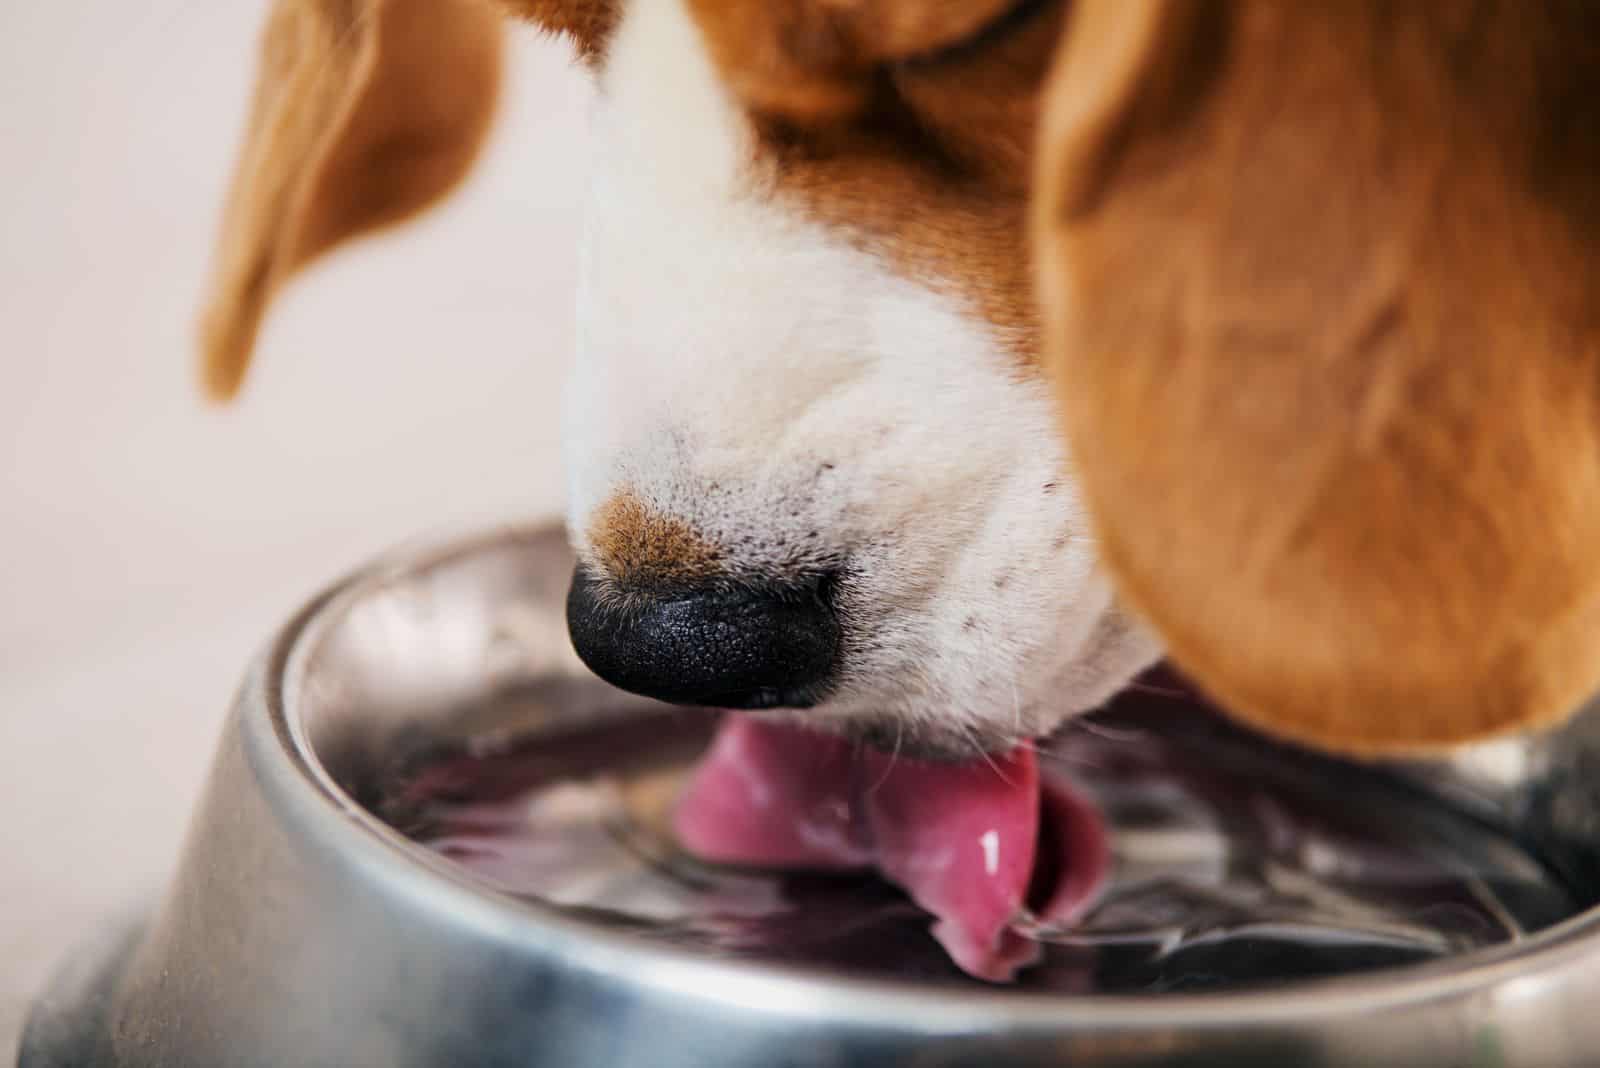 the dog drinks water from the bowl